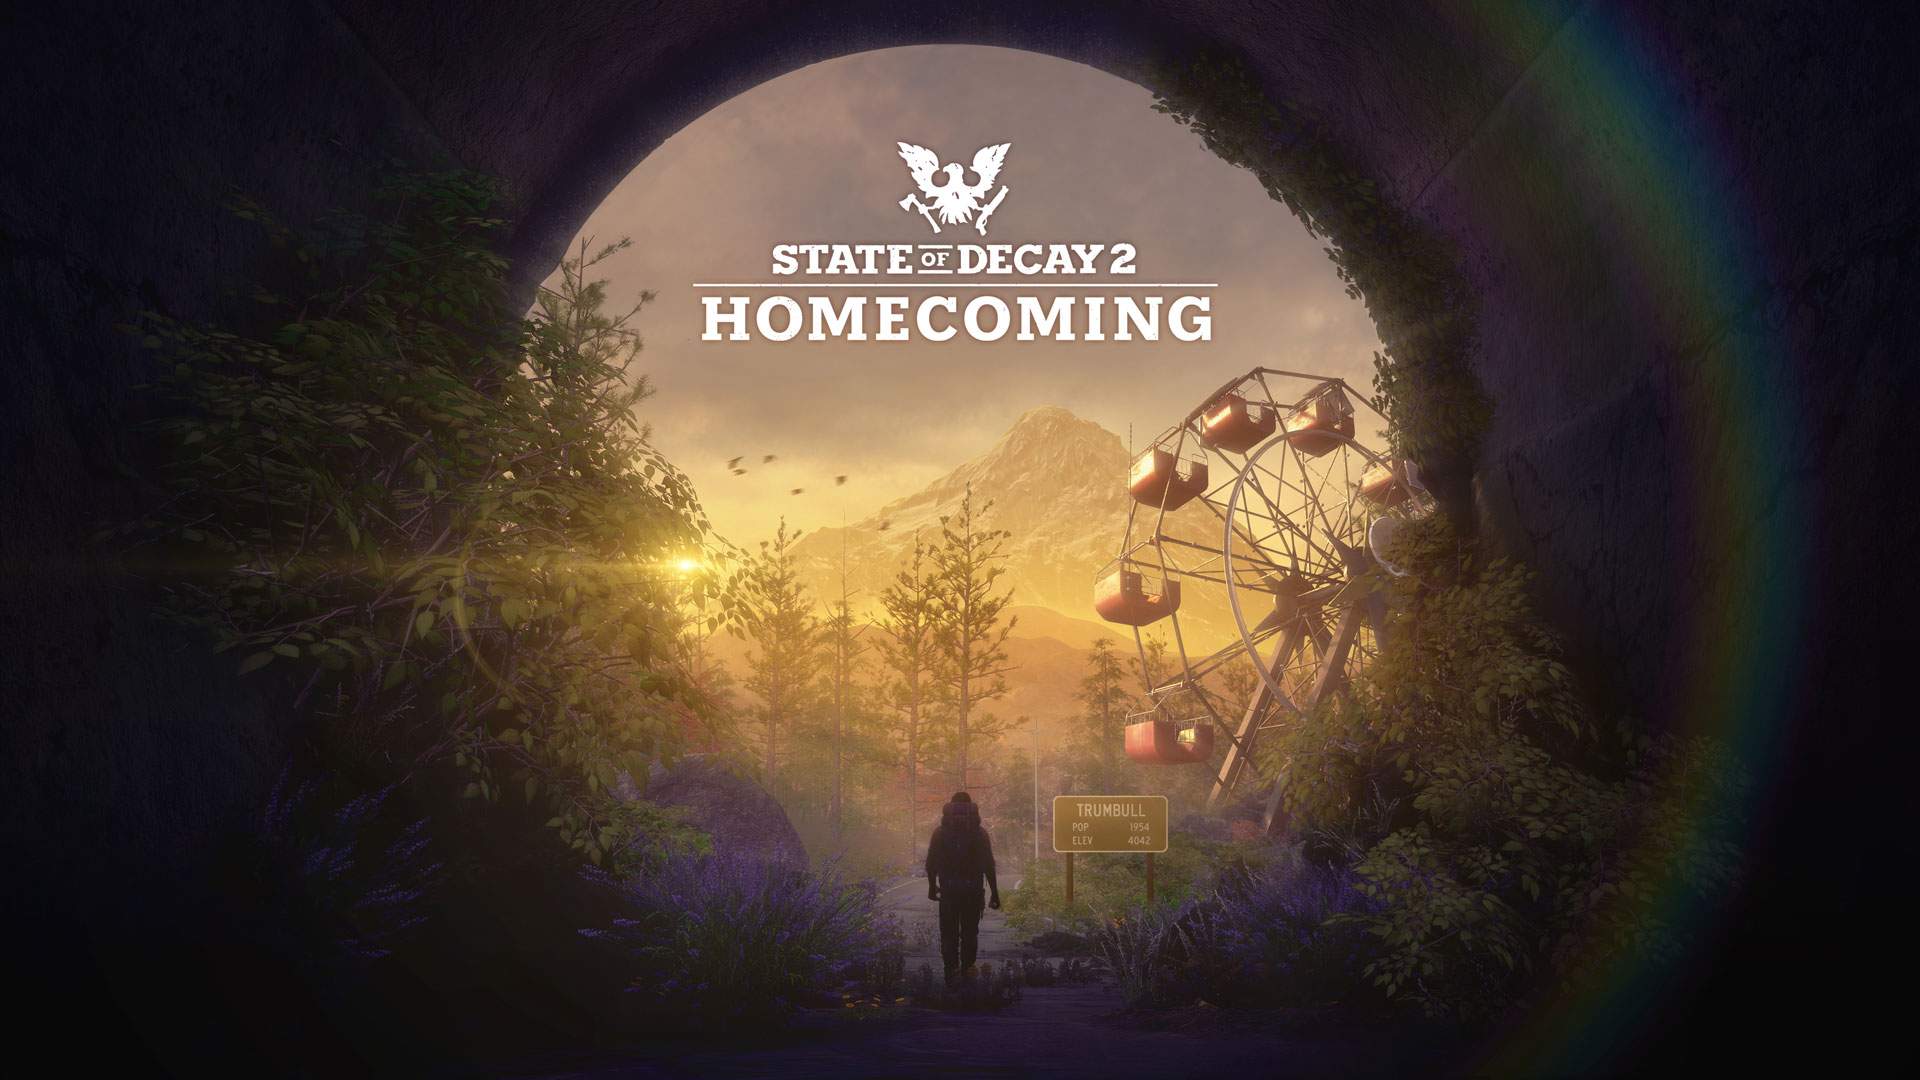 Video For State of Decay 2 Returns to Trumbull Valley in the Homecoming Update